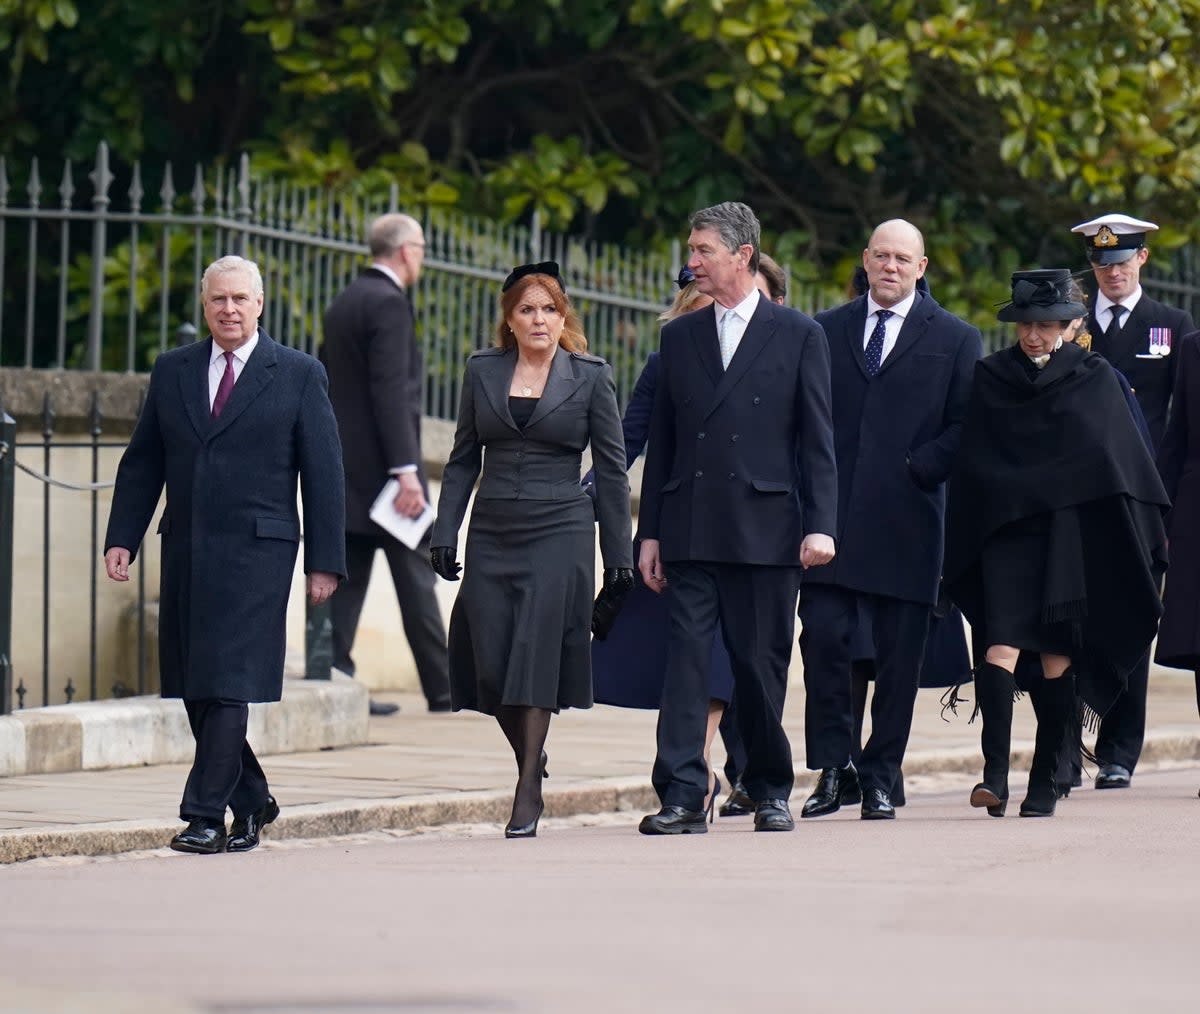 The Duke and Duchess of York arrive at a thanksgiving service for the life of King Constantine of the Hellenes at Windsor on Tuesday (Andrew Matthews/PA Wire)